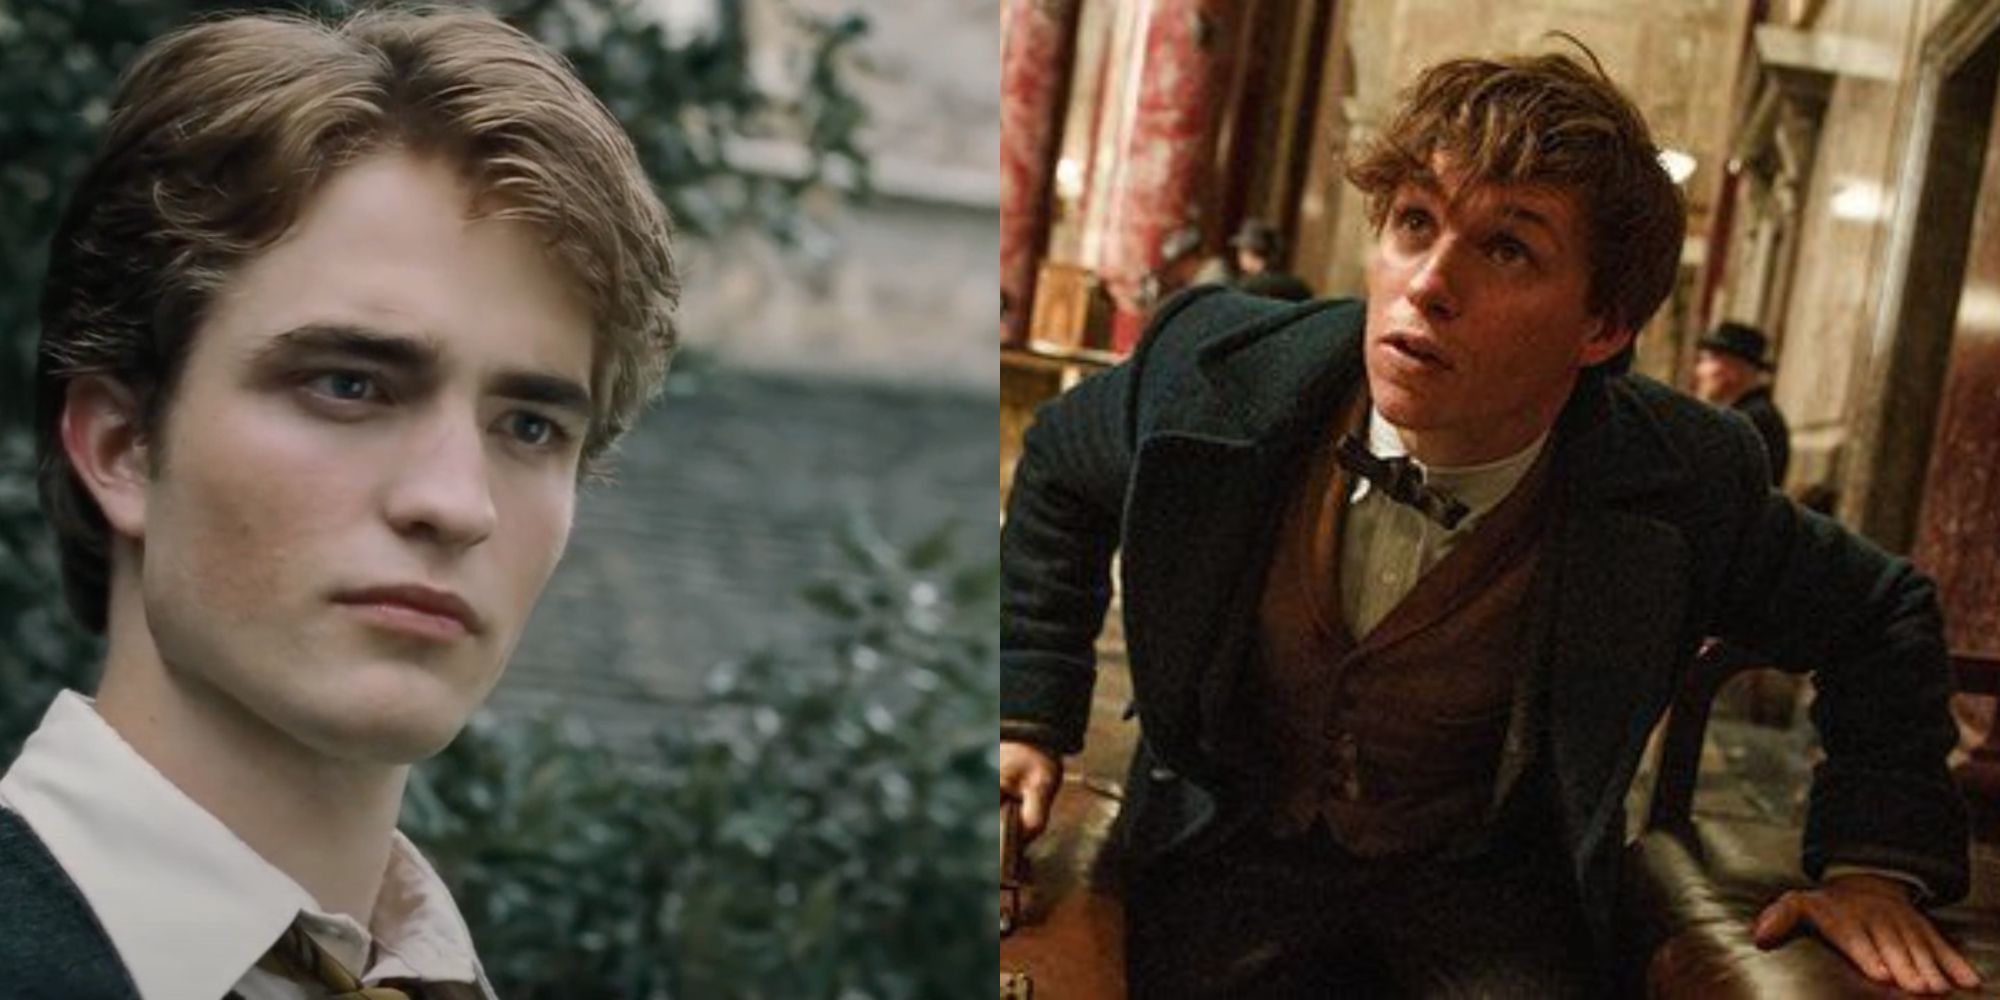 Split images of Cedric Diggory in Harry Potter 4 and Newt Scamander in Fantastic Beasts